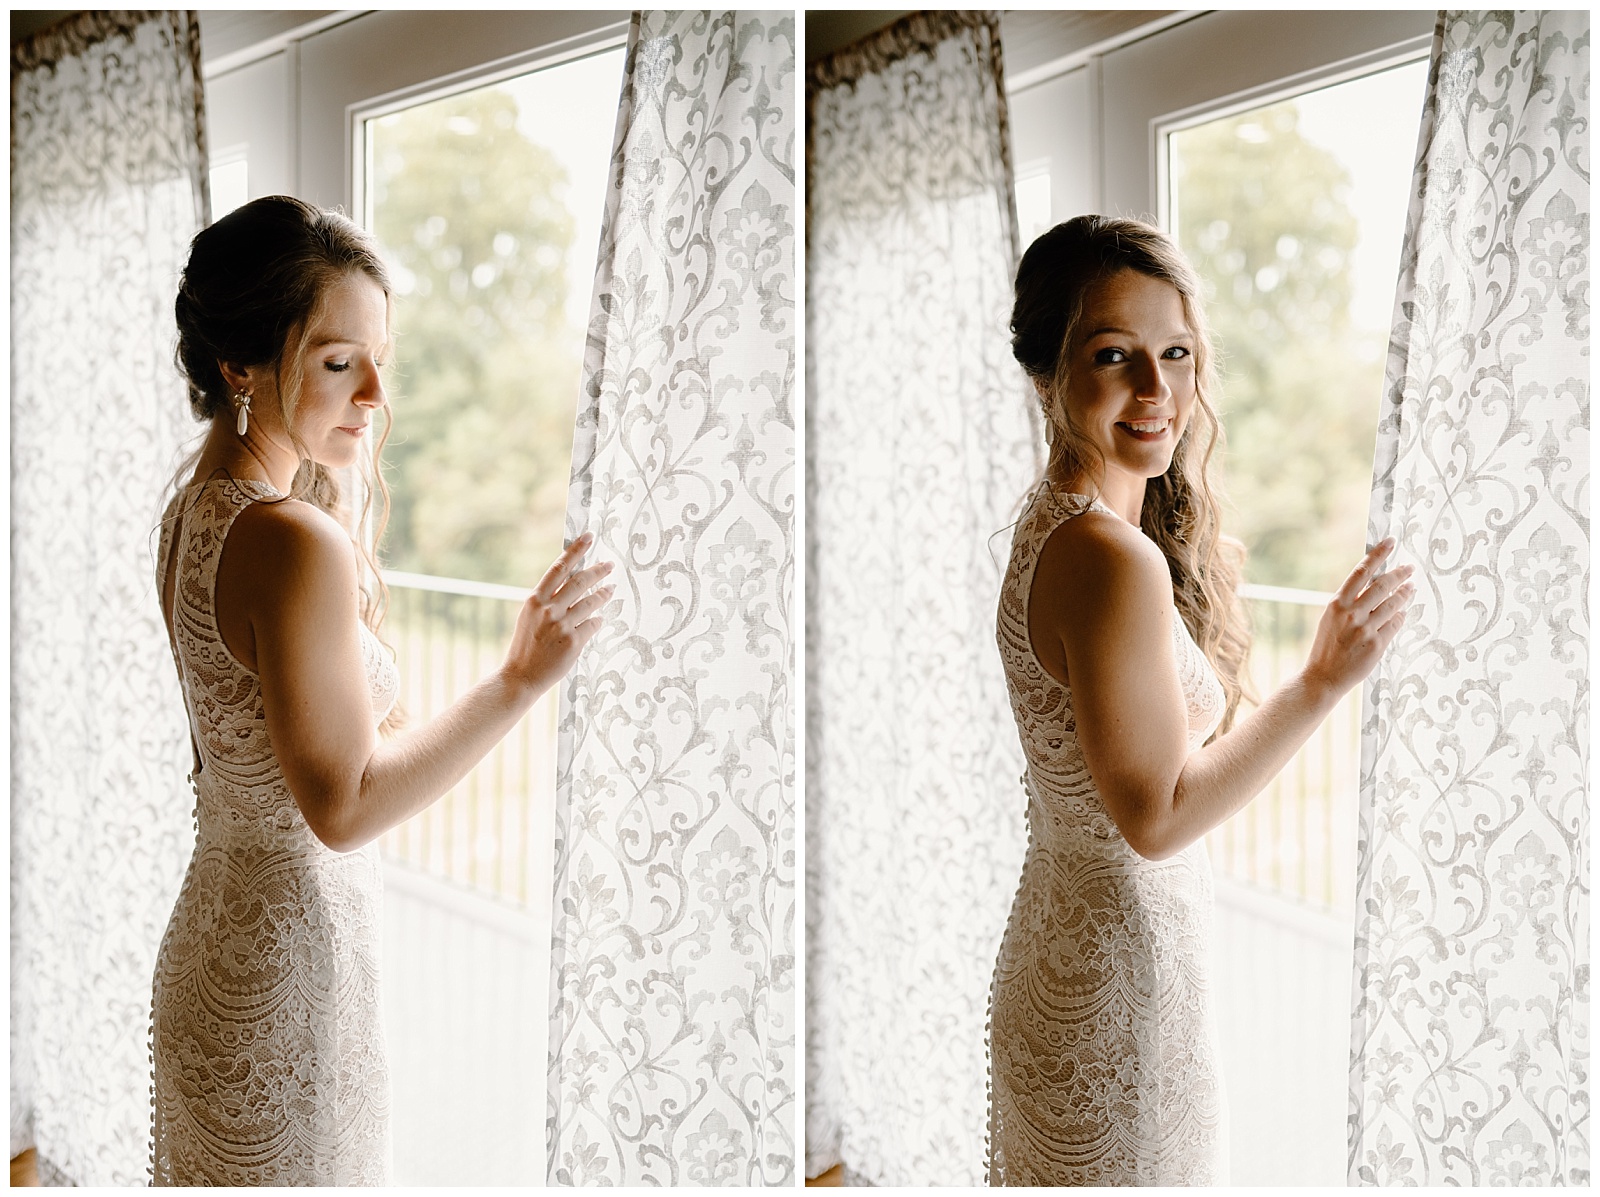 Bride standing in middle of a three pane window with her back to the camera, holding open the sheer white curtains and letting the sunlight create a silhouette around her. Her dress is a fitting sheath style with a key hole back, vintage buttons, and bohemian lace overlay in off white.